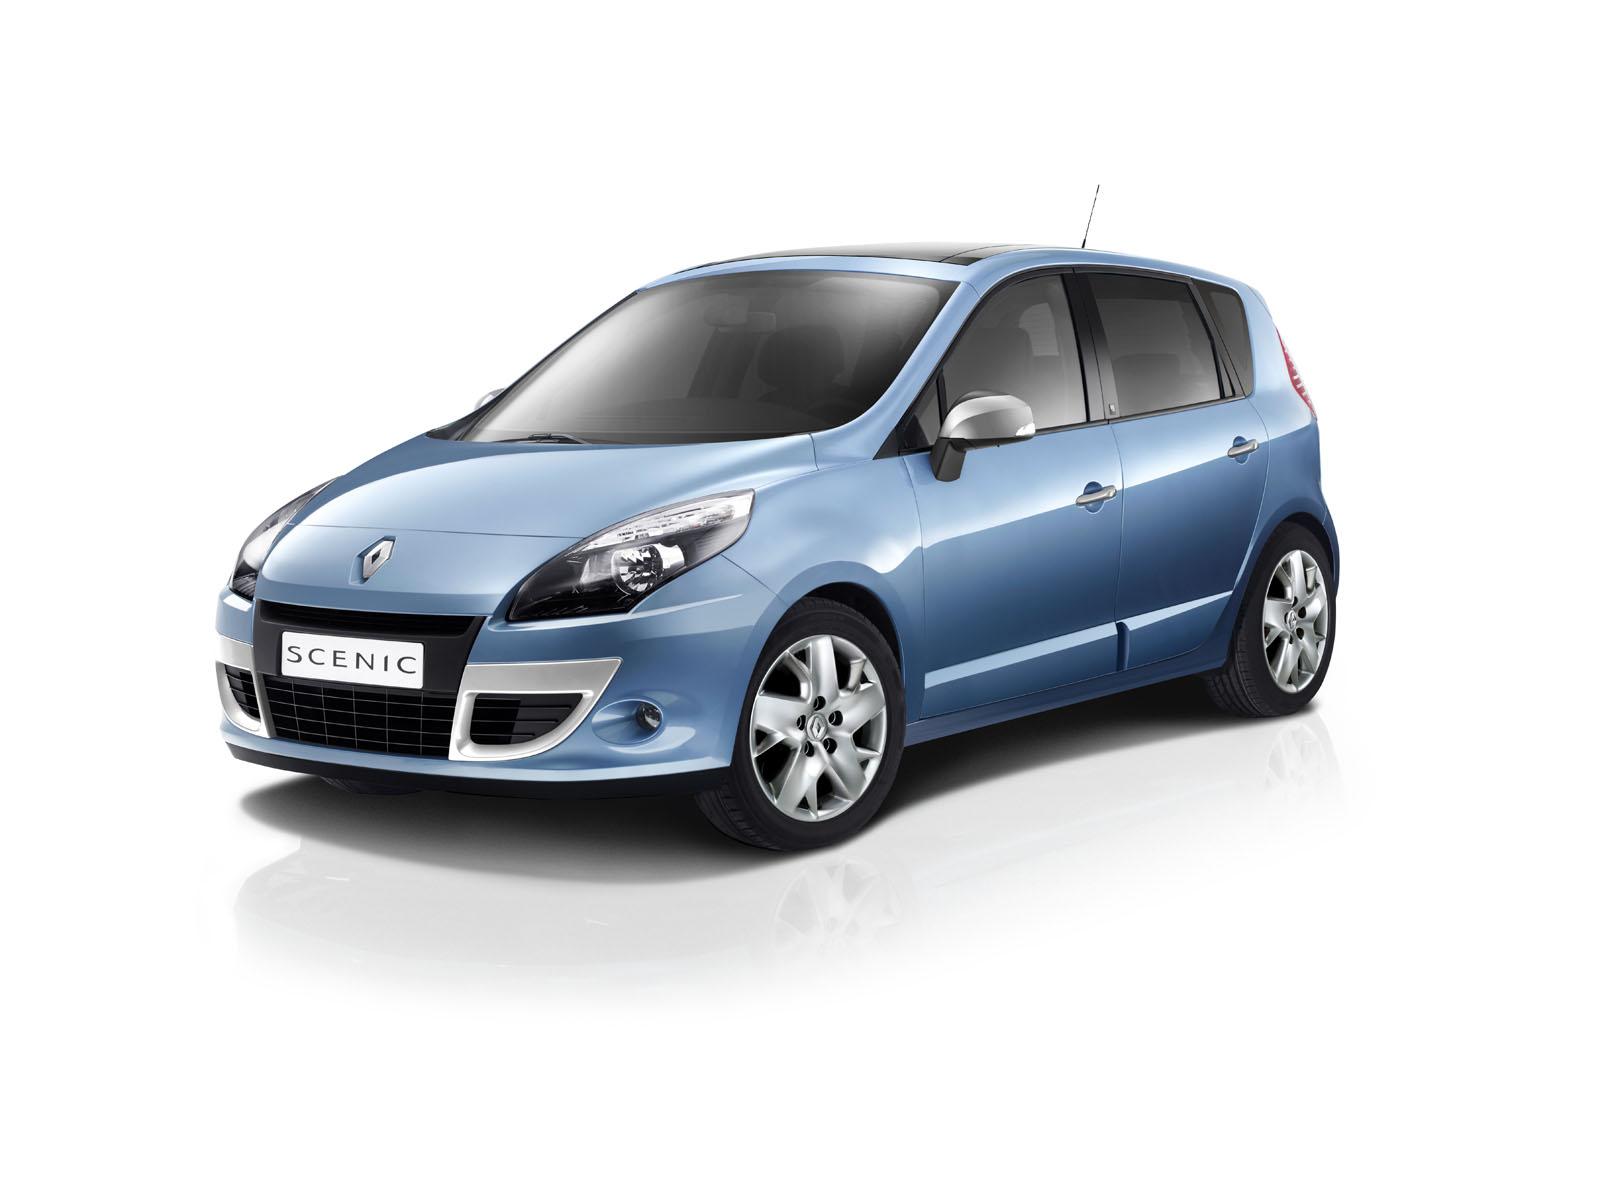 Renault Scenic special edition